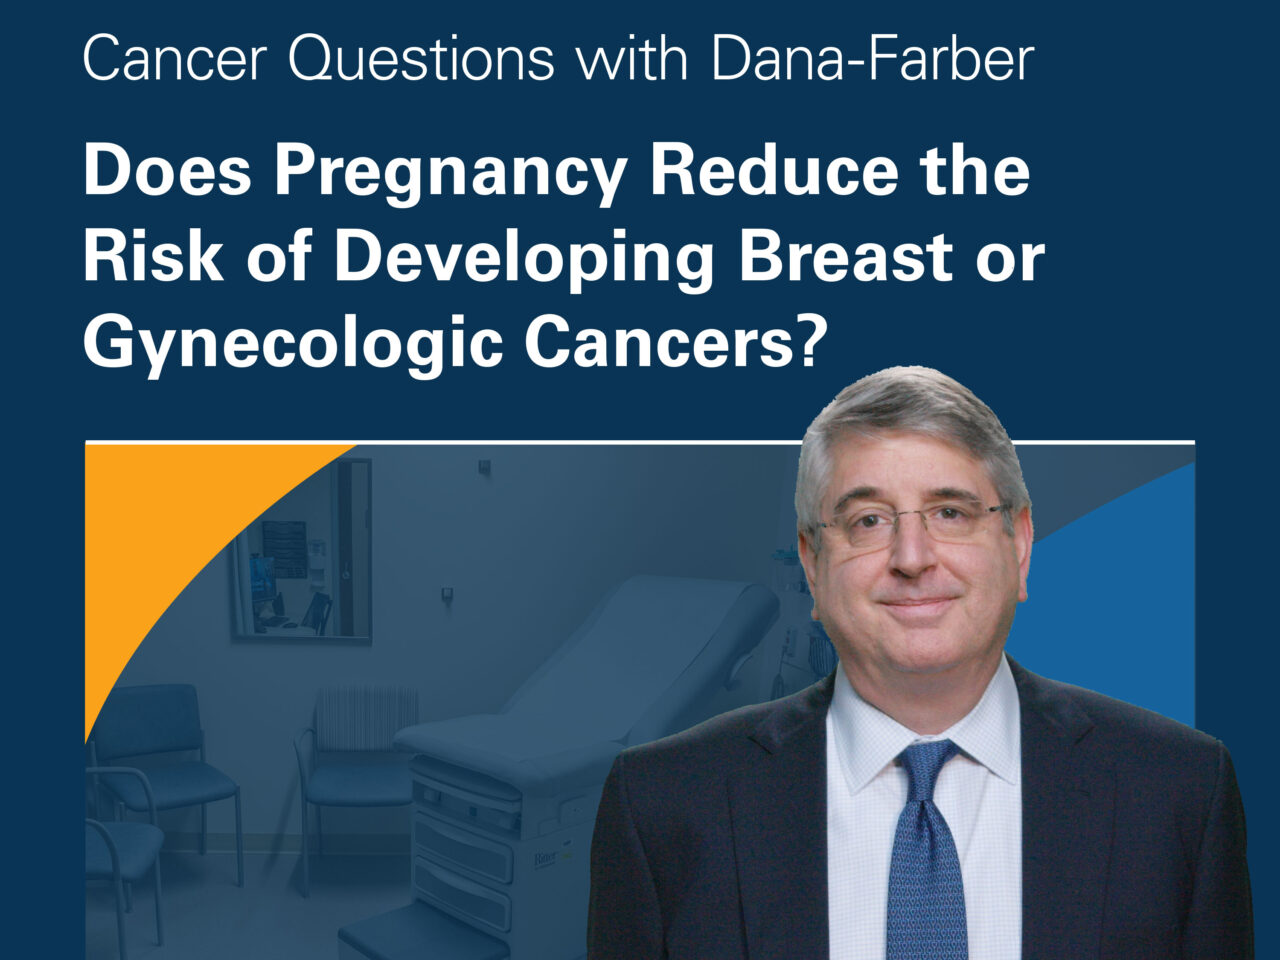 Does pregnancy reduce the risk of developing breast or gynecologic cancers? – Dana-Farber Cancer Institute